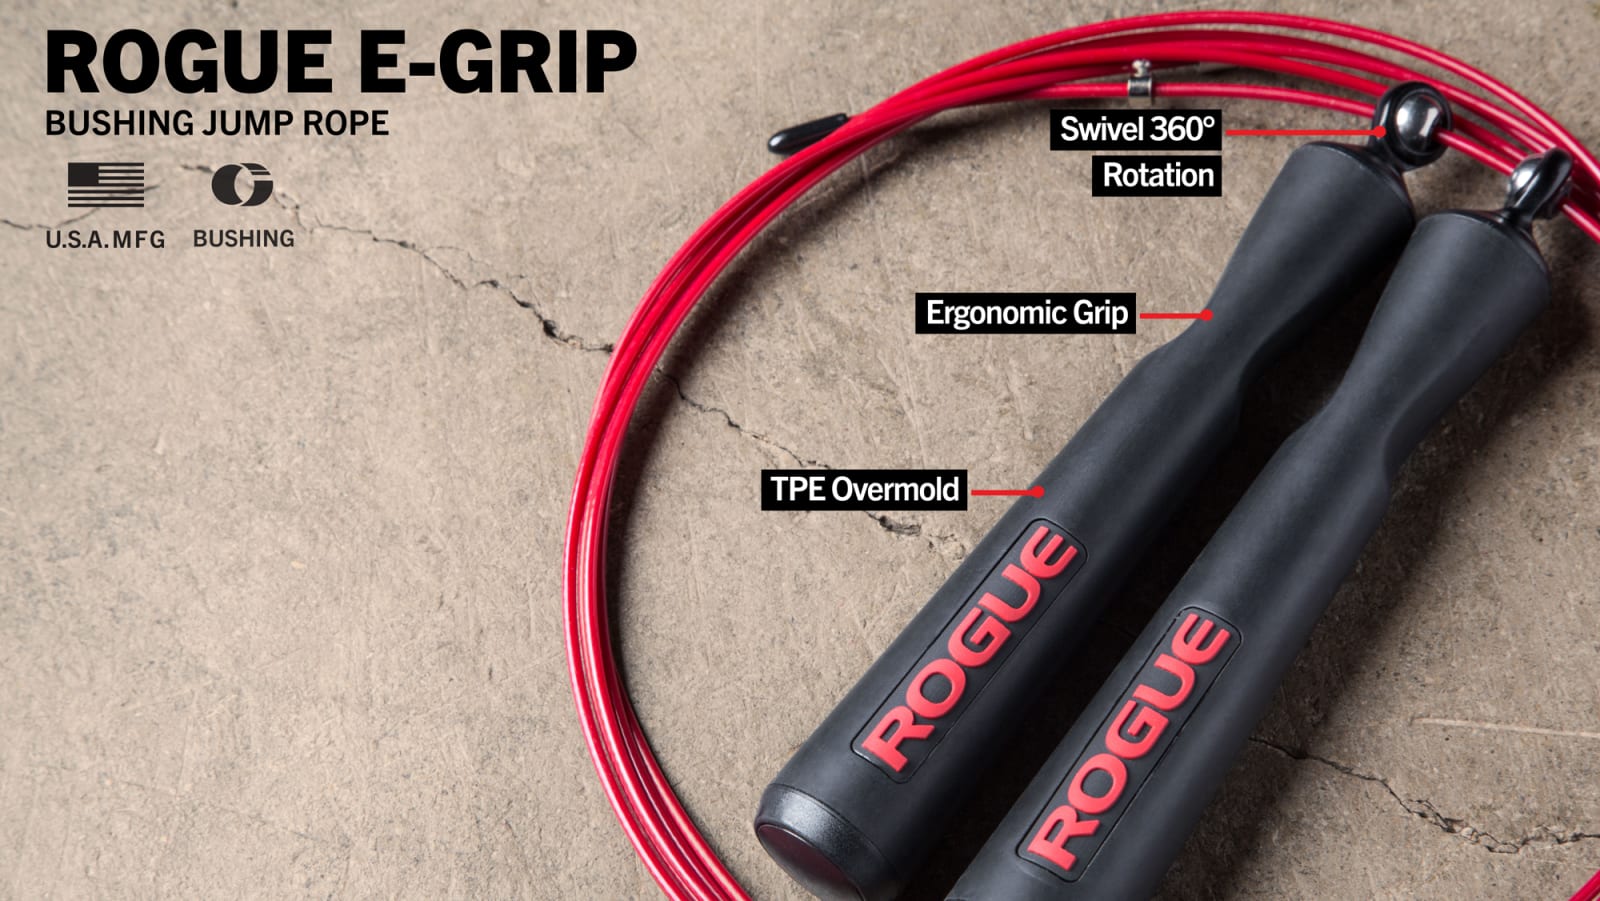 BODYQUEST X-Speed Jump Rope for CrossFit from ROGUE Factory Fitness Conditioning 